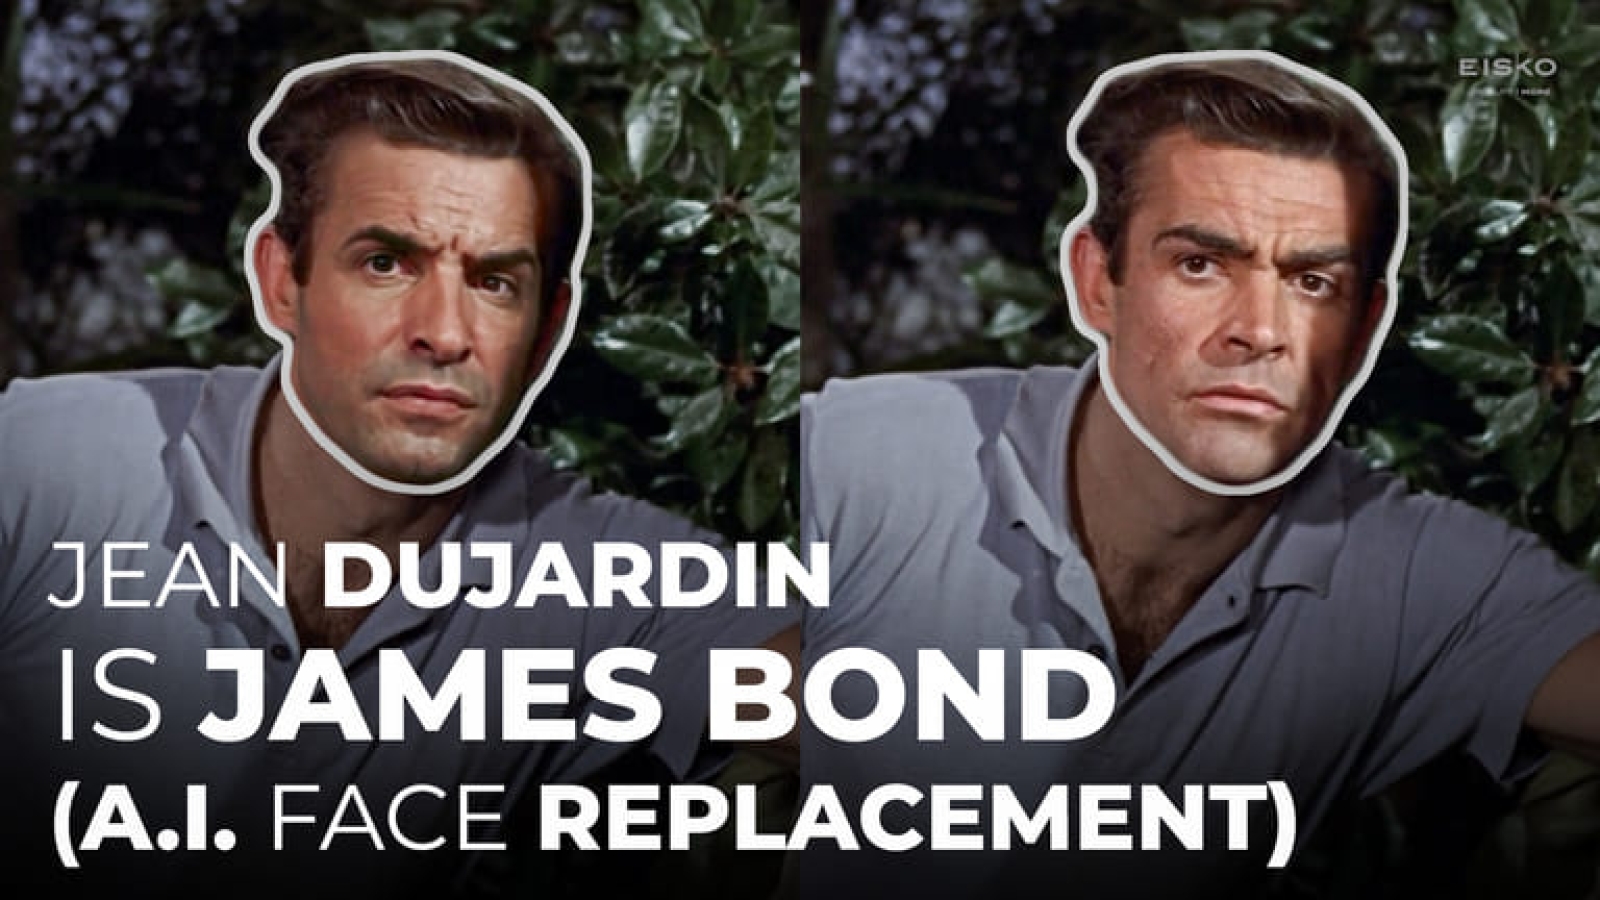 Deepfake of Jean Dujardin and Sean Connery in James Bond Dr No thanks to Eisko AI Face Replacement